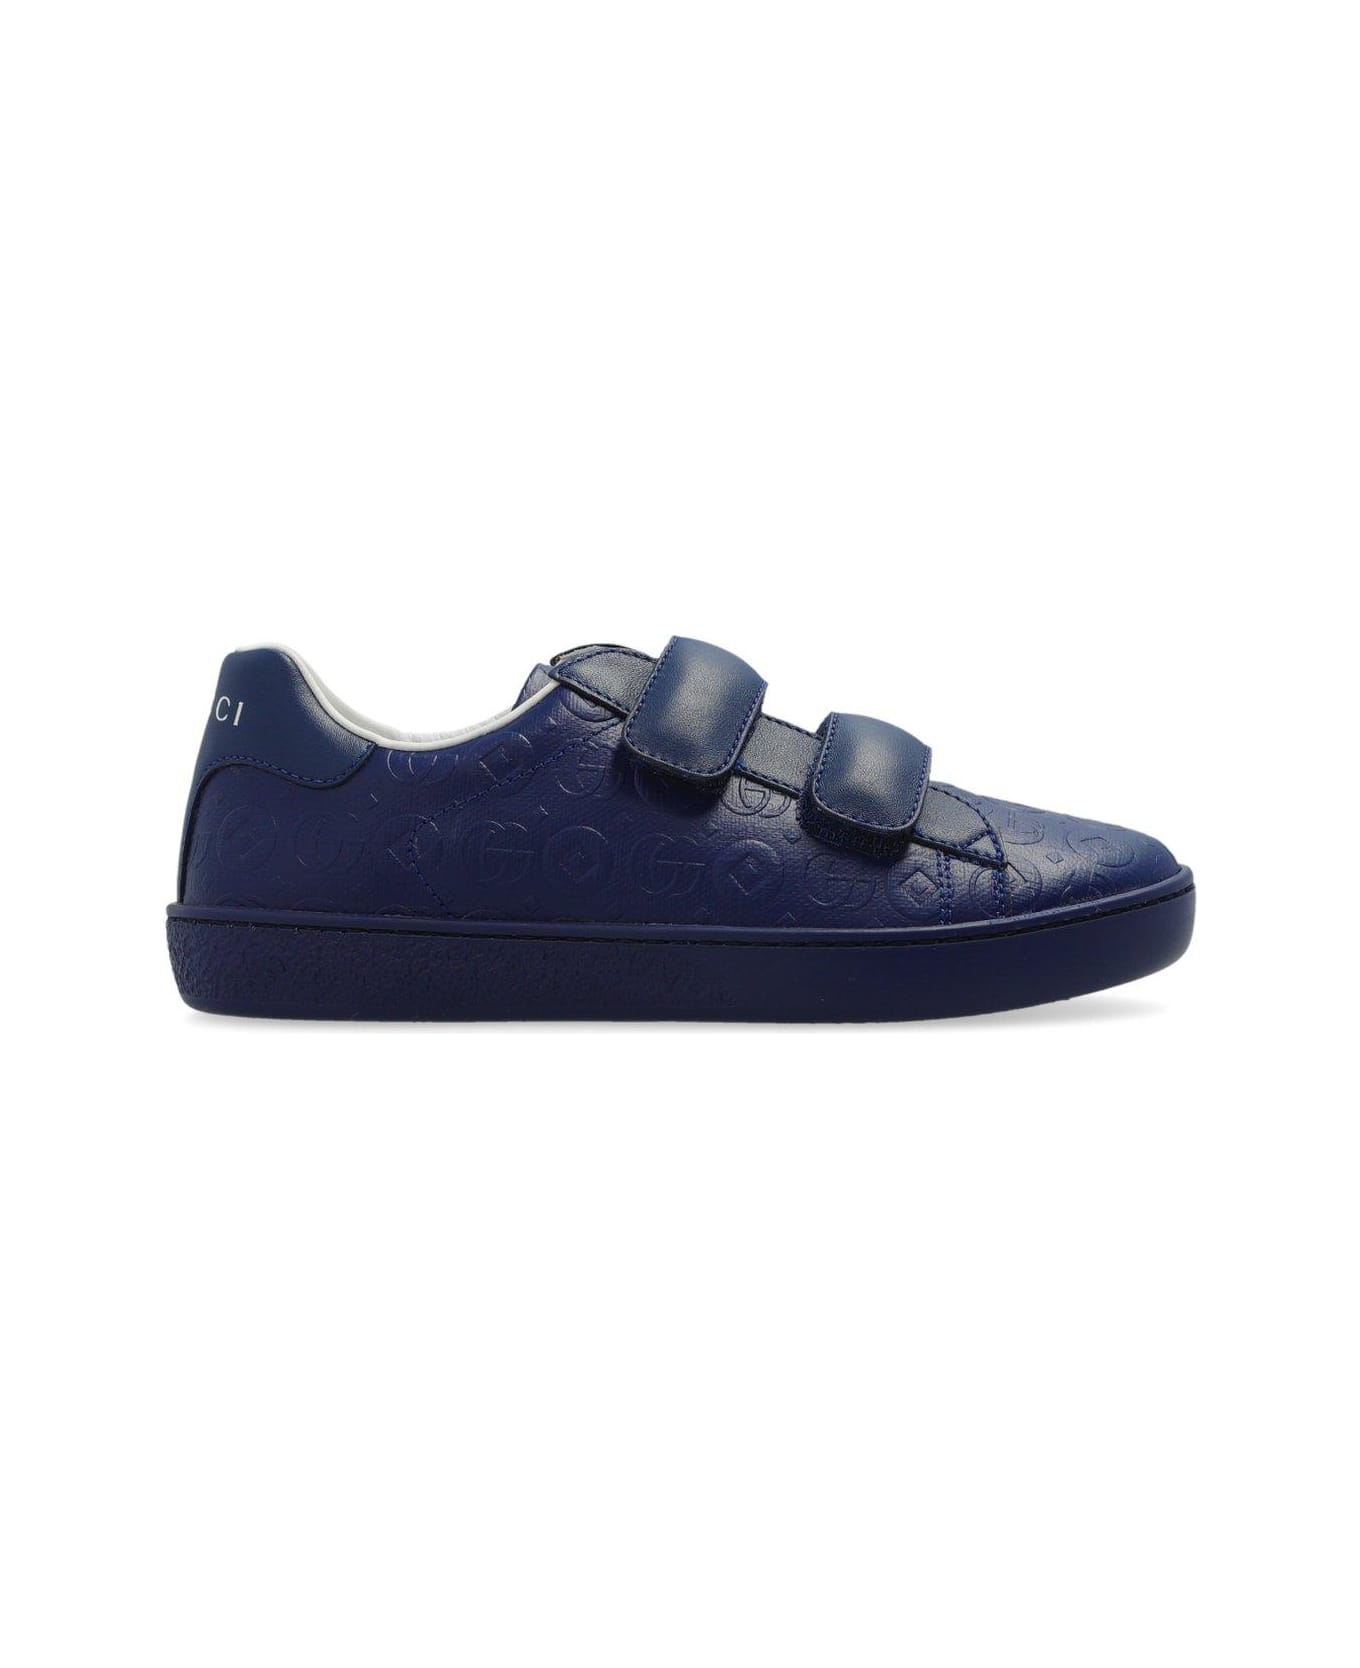 Gucci Ace Double G Round Toe Sneakers - NAVY